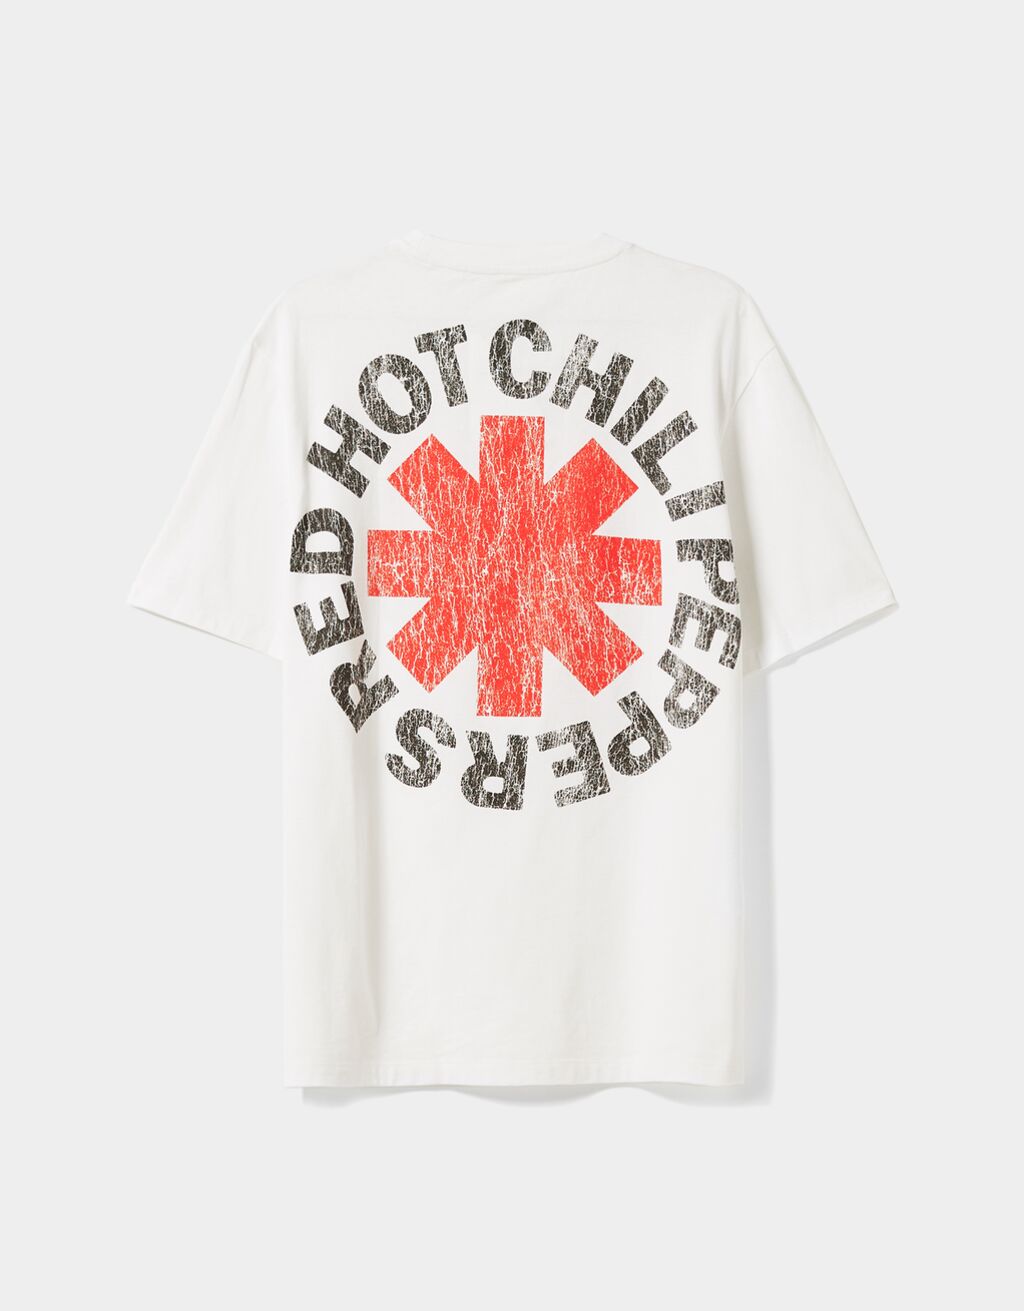 Red Hot Chili Peppers regular fit short sleeve T-shirt